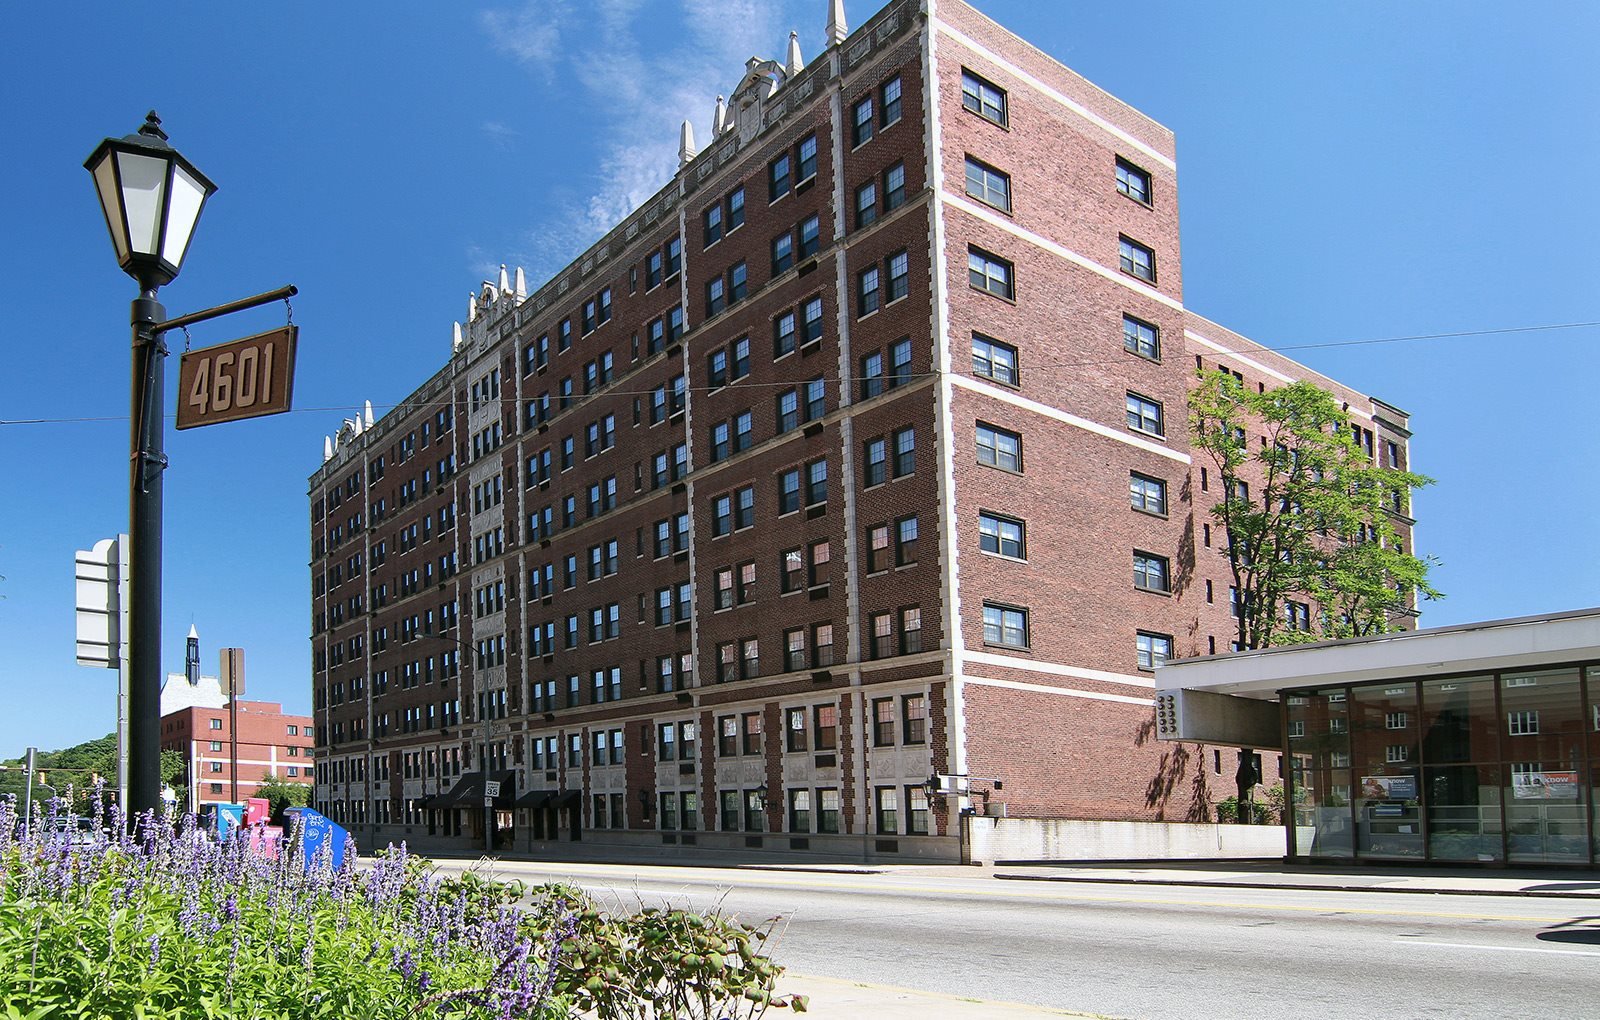 Fairfax Apartments in downtown Pittsburgh